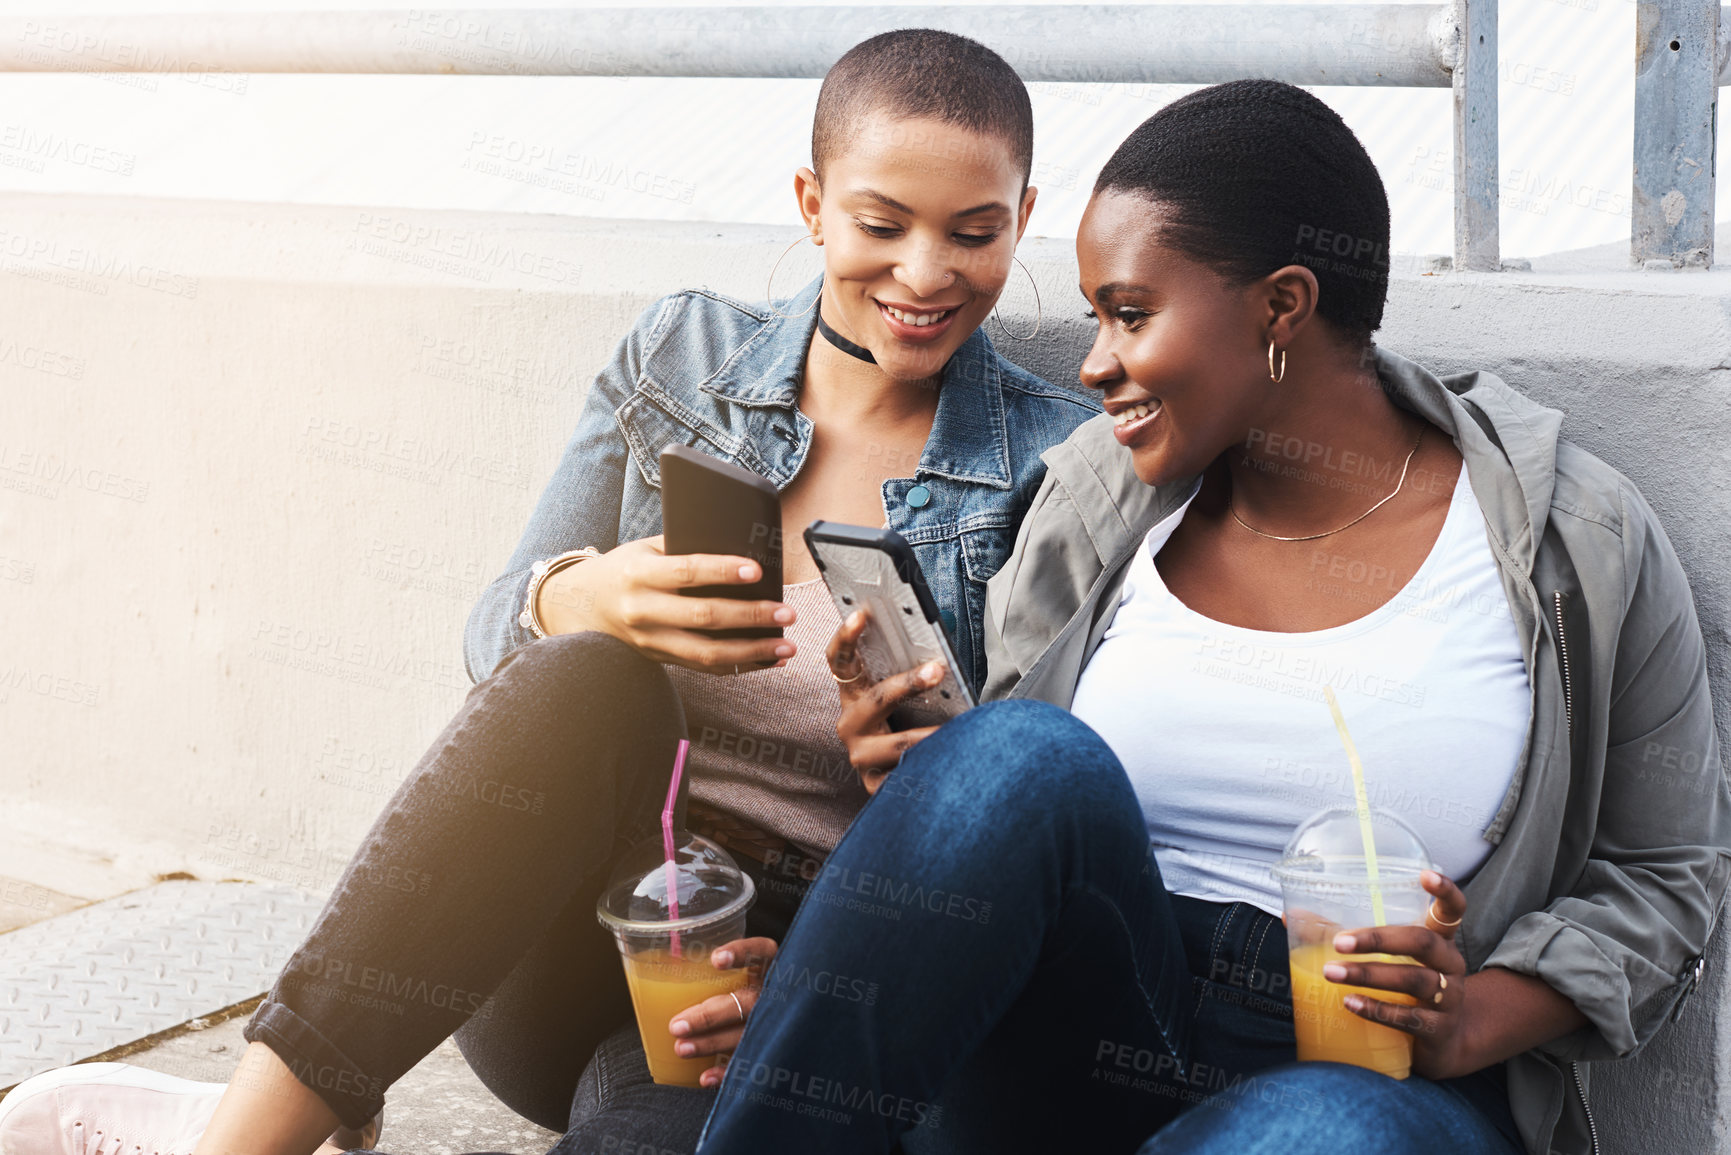 Buy stock photo Shot of two young women in the city sitting down while laughing and holding their drinks reading through text messages